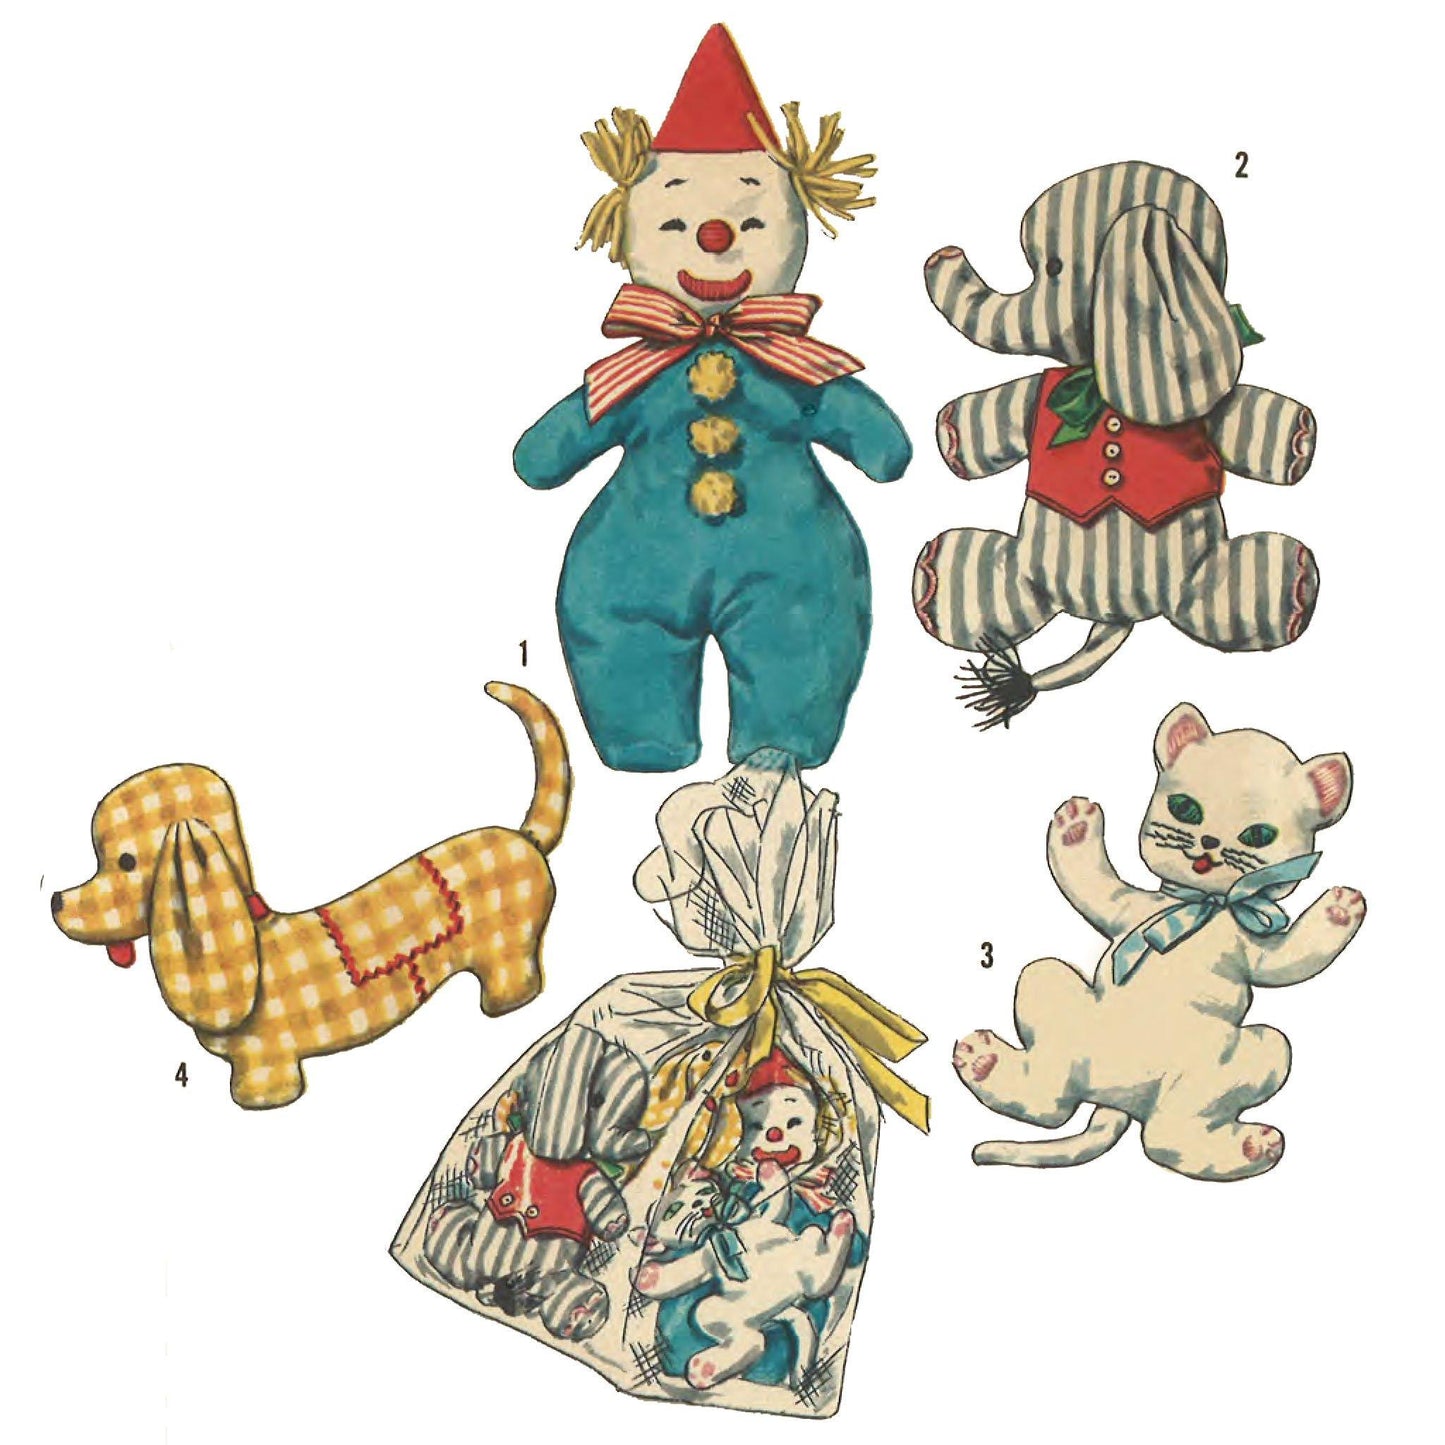 Childrens' toys: clown, doggy, cat and elephant